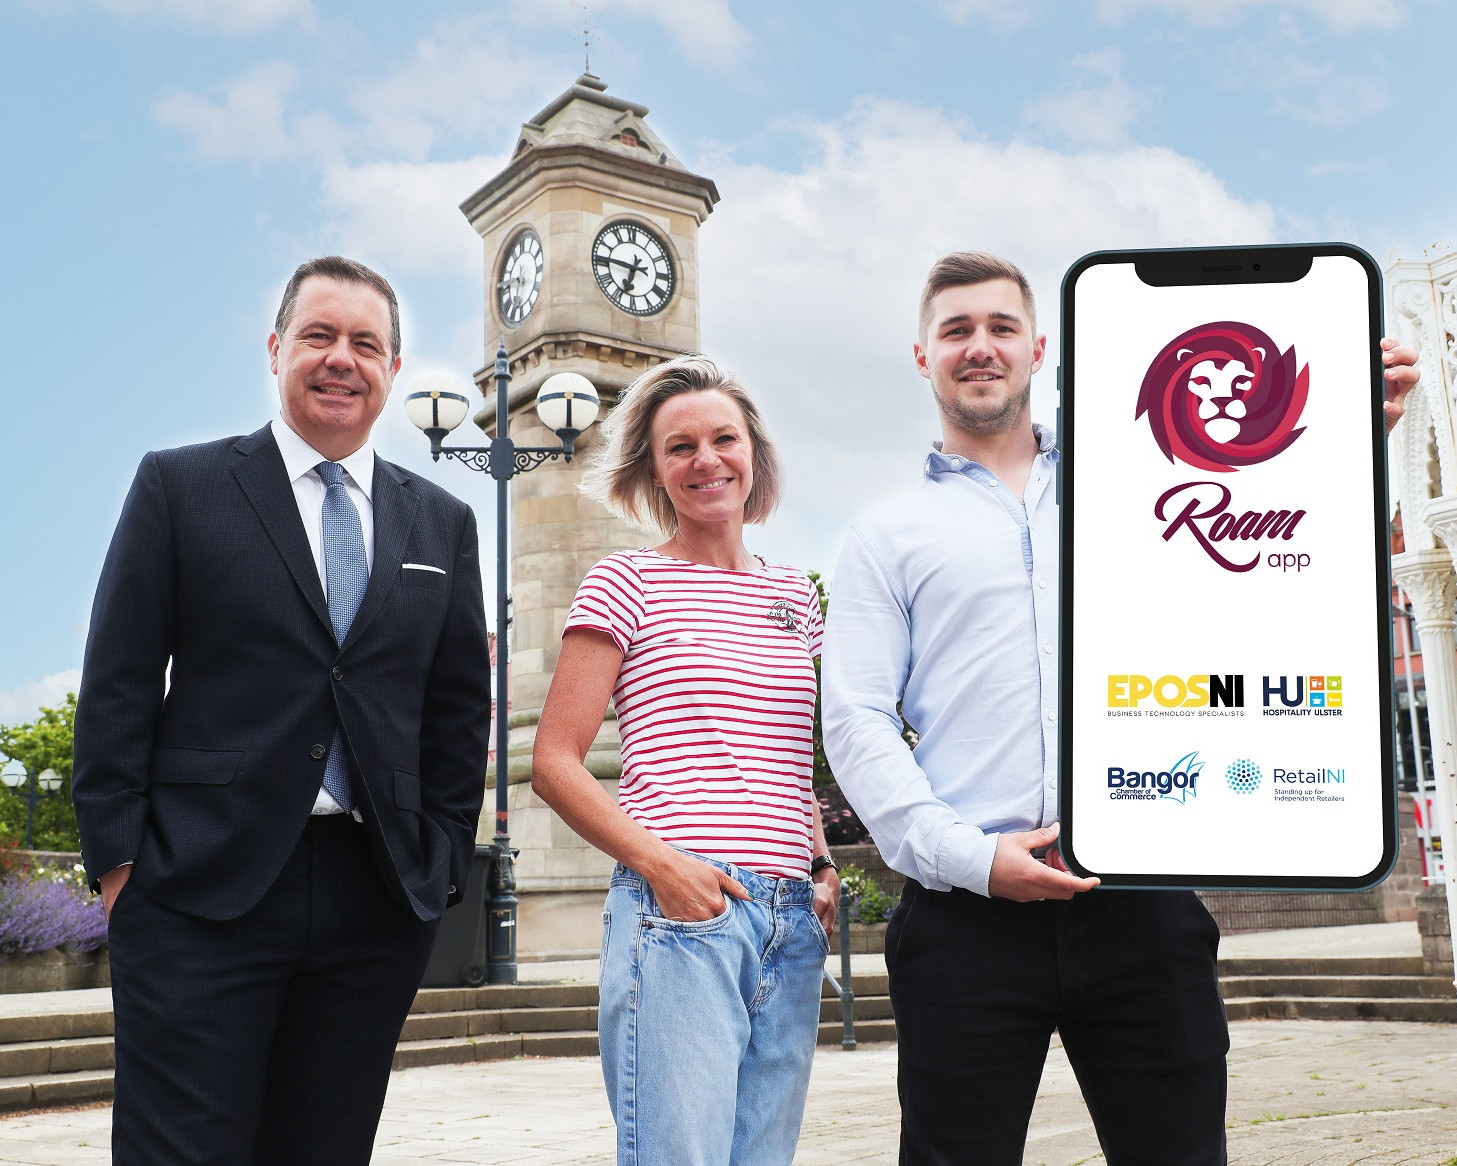 Bangor first city in Northern Ireland to launch Roam Local app